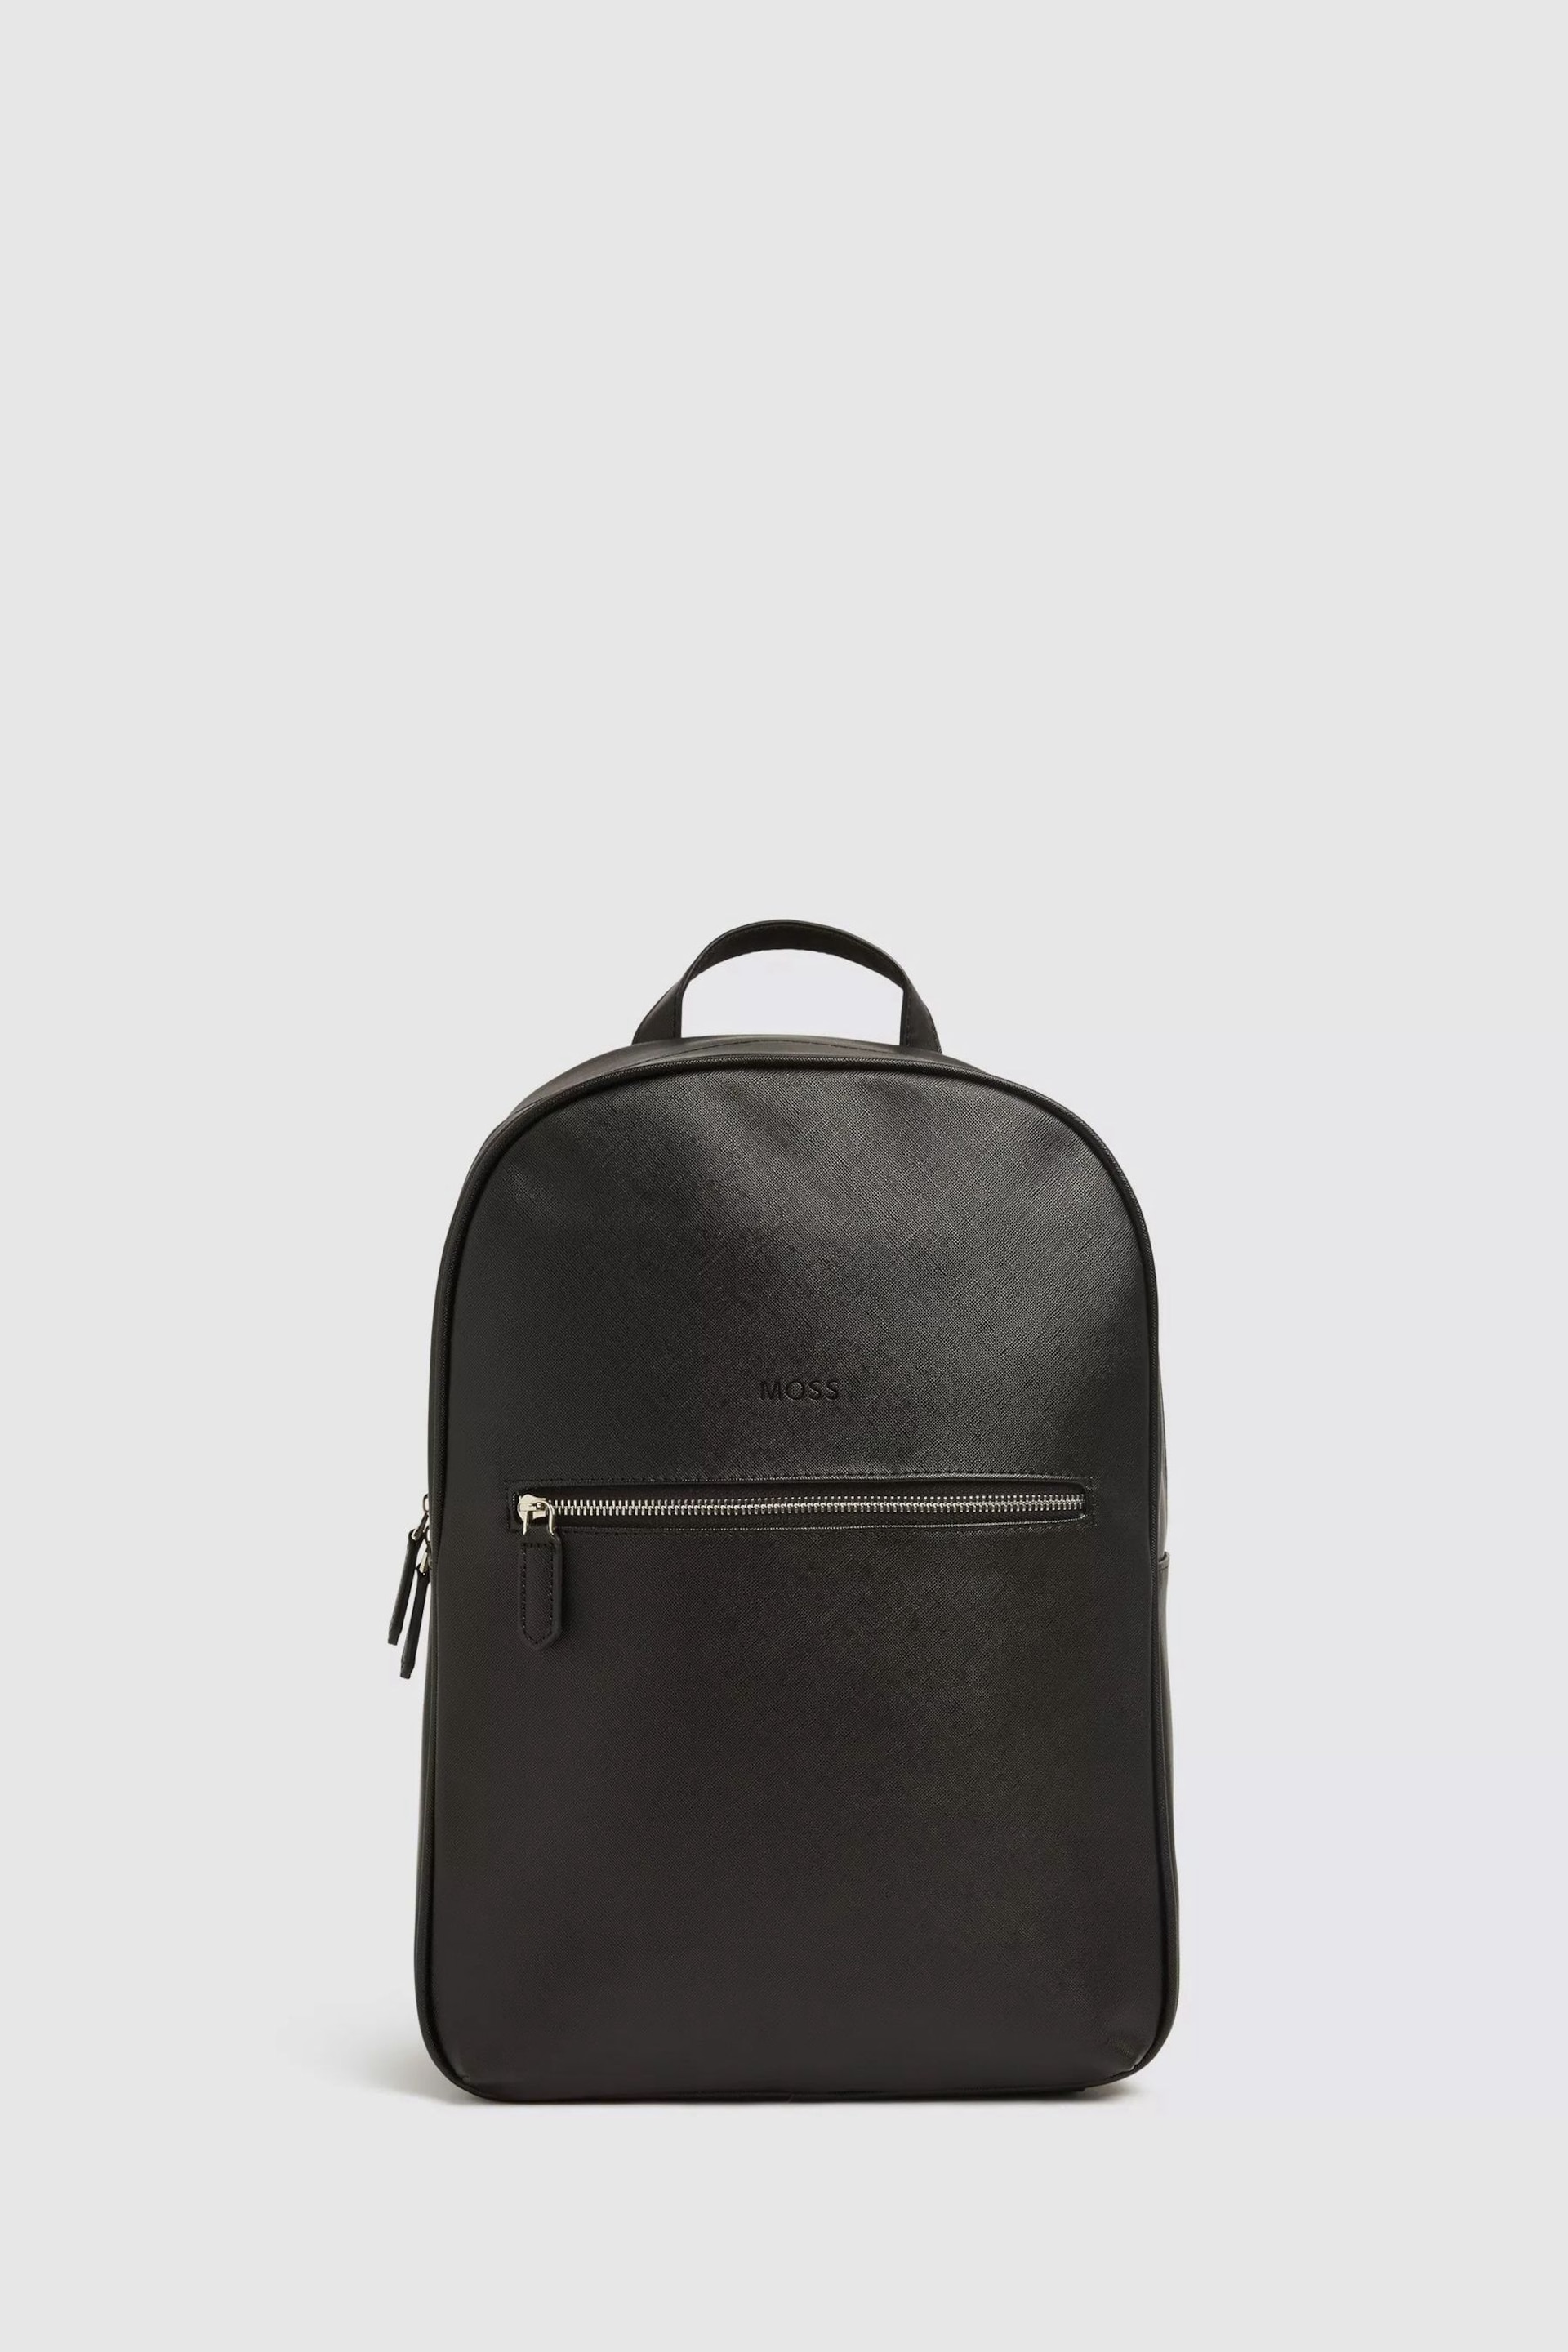 MOSS Saffiano Black Backpack - Image 1 of 4